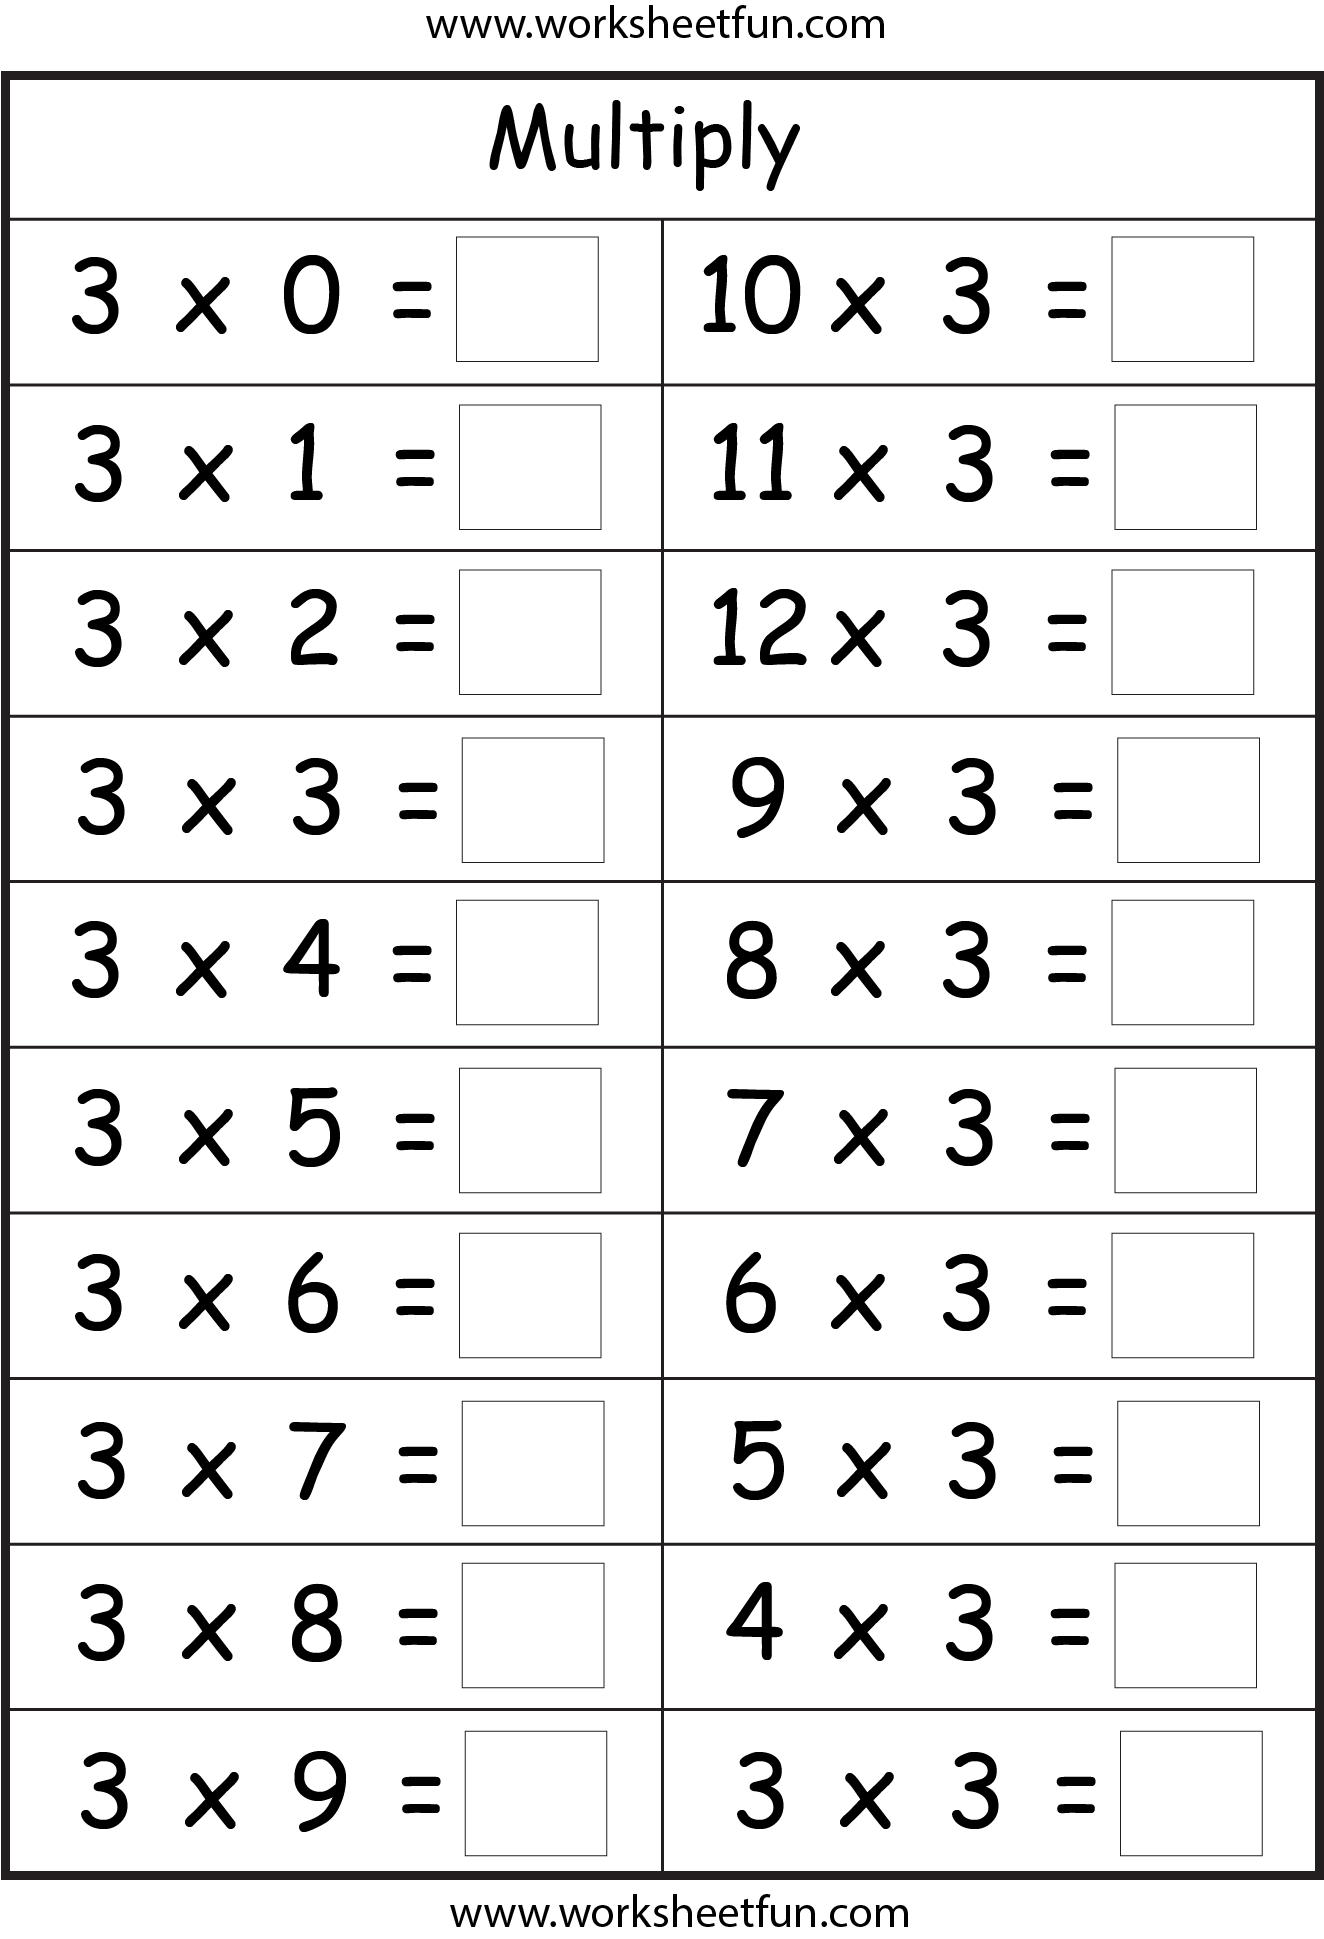 Learning Multiplication Facts Printable Worksheets Grade 4